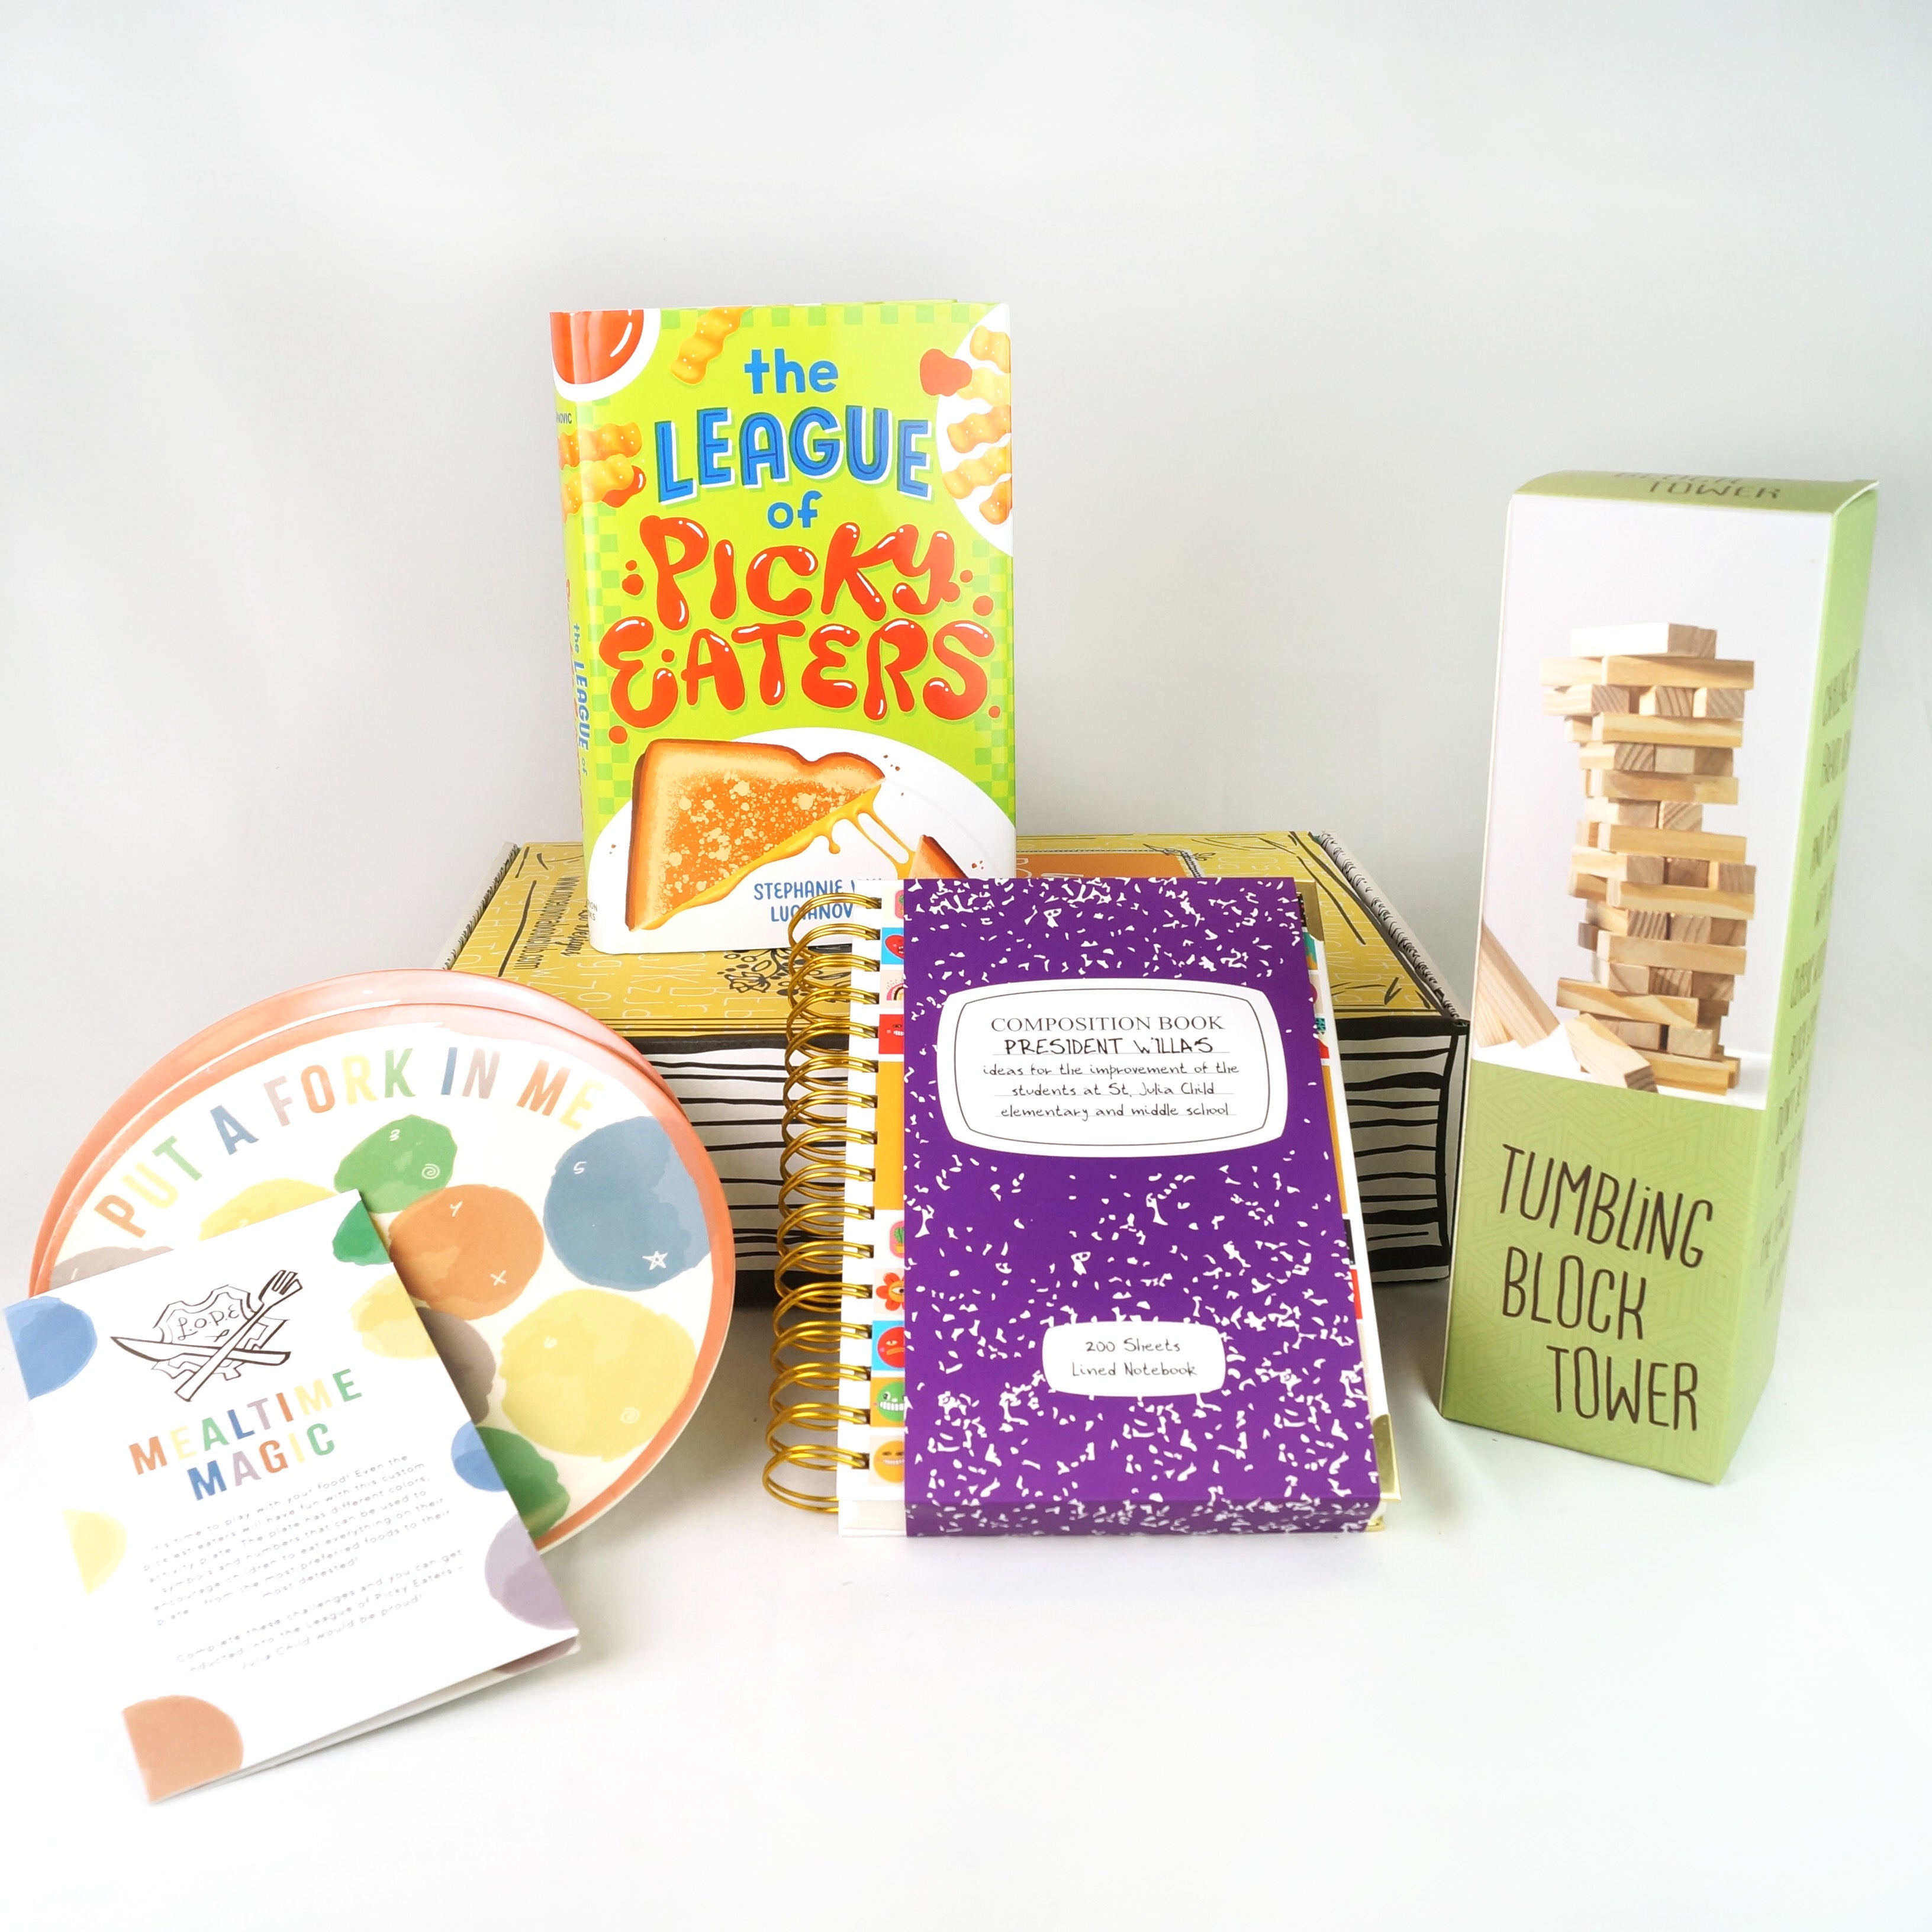 A hardcover edition of The League of Picky Eaters stands on a yellow OUABC box. In front of the box are two plates with colored dots on them, a purple notebook, and a box labeled tumbling block tower.